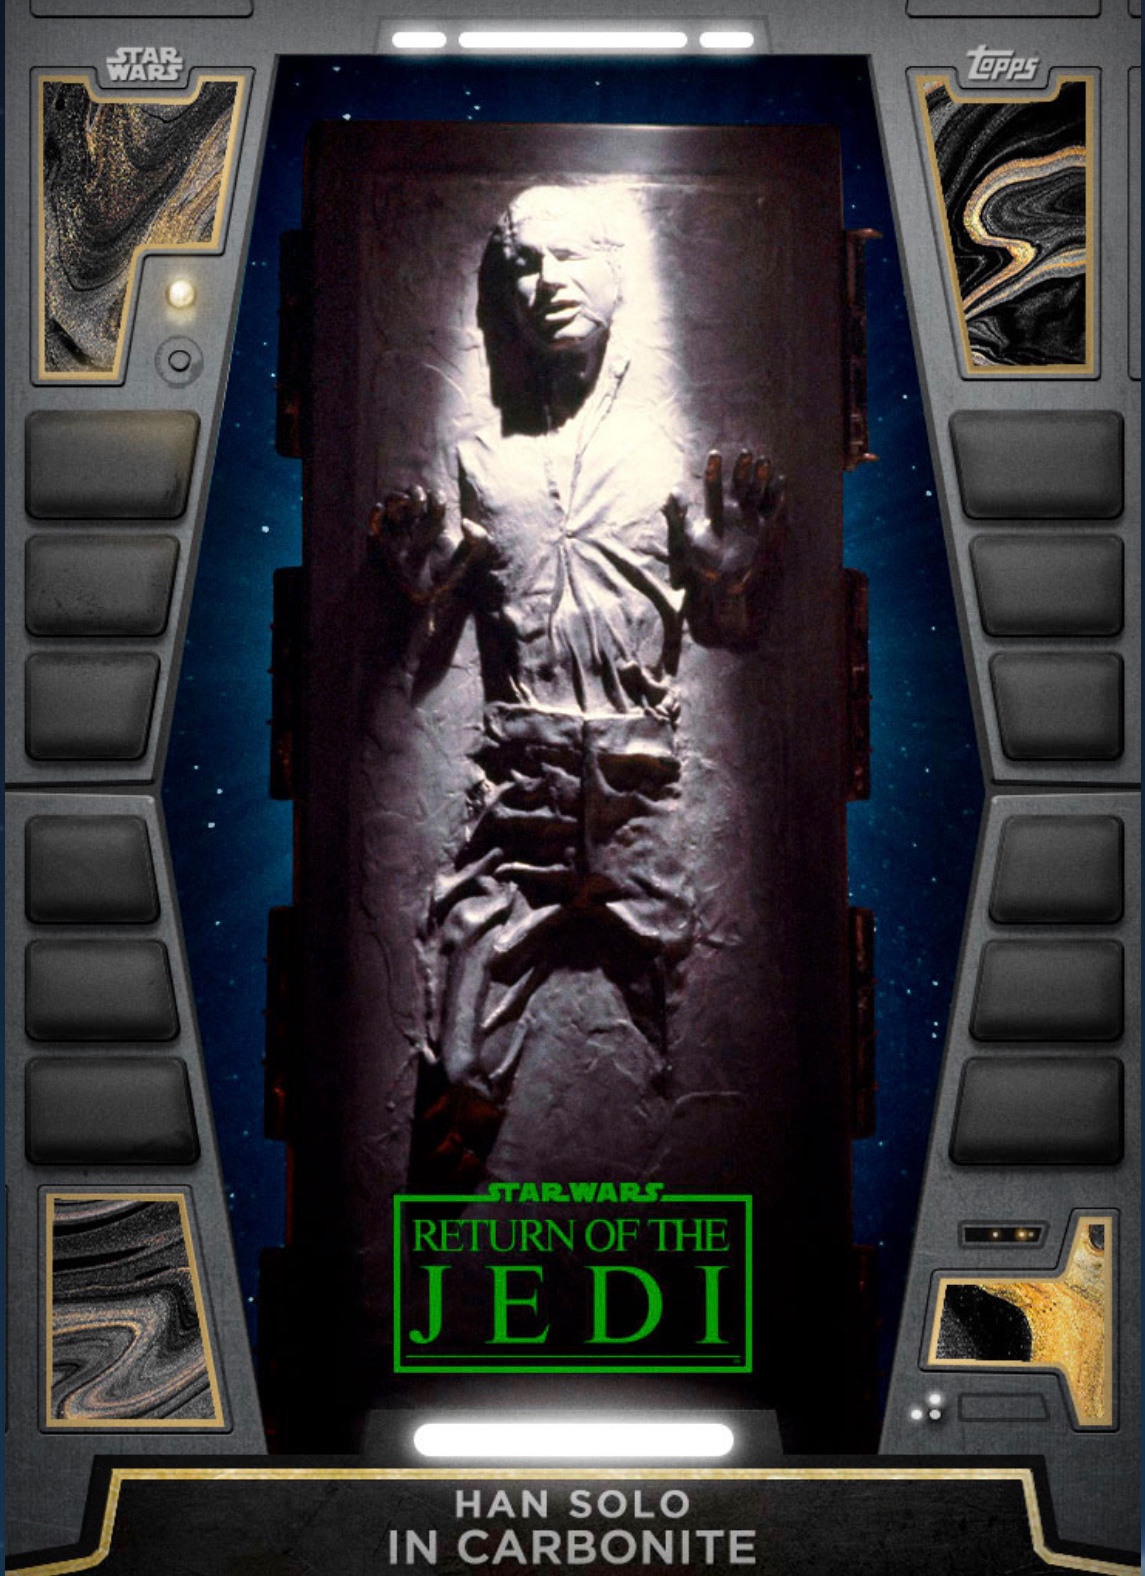 The Han Solo in Carbonite 2020 monument. (Image: Topps/Lucasfilm)